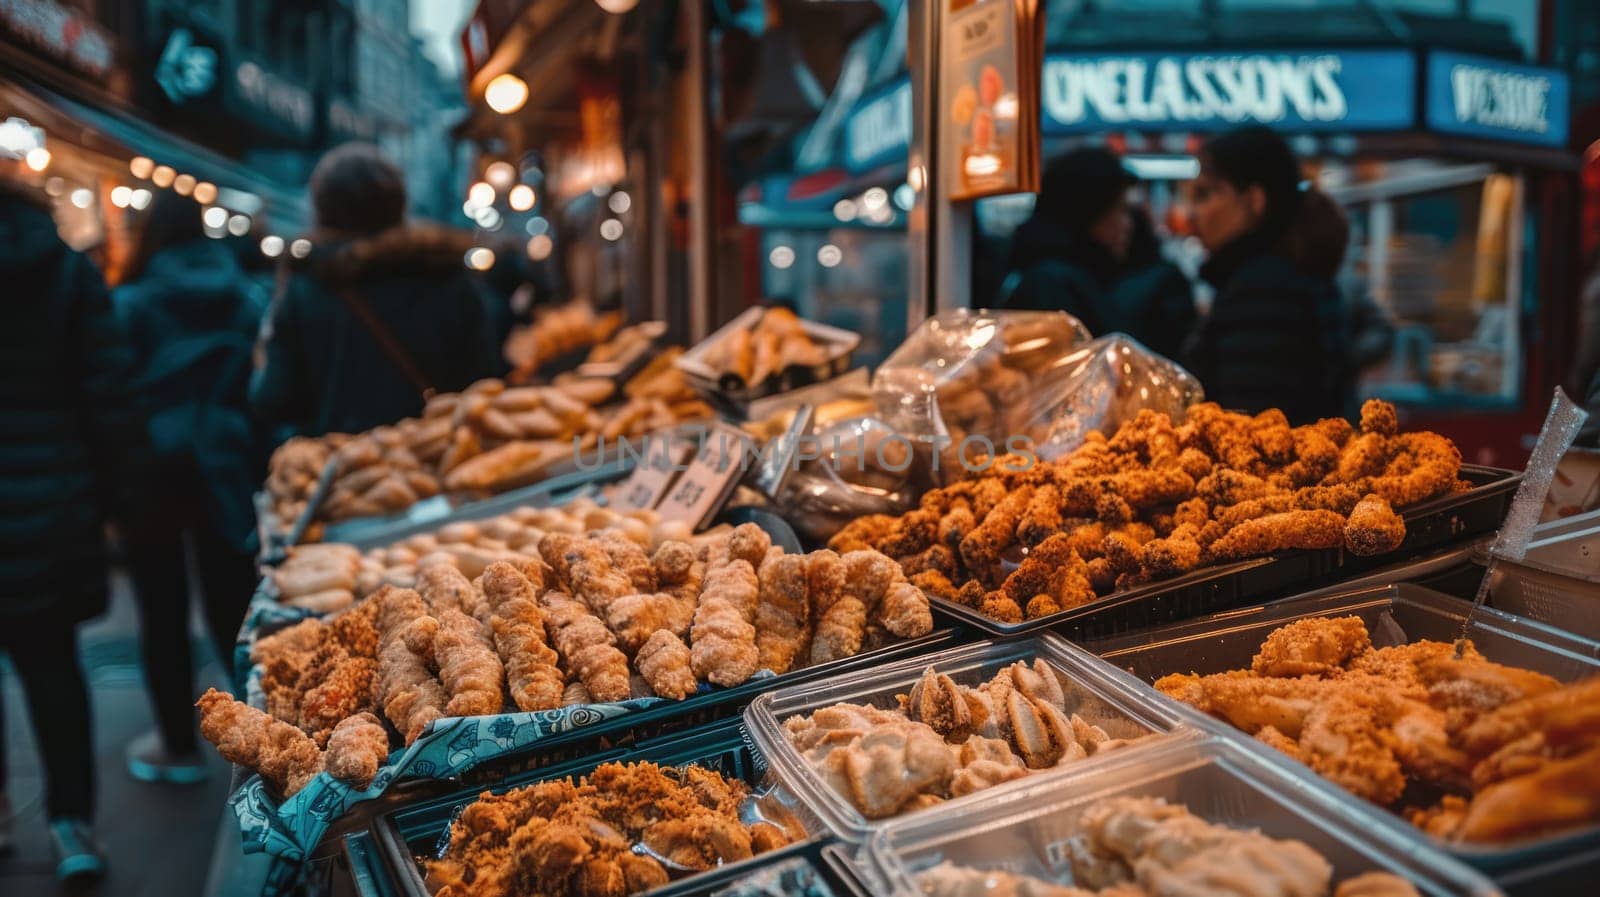 Variety of Asian food items offered at a street fair outdoors AI